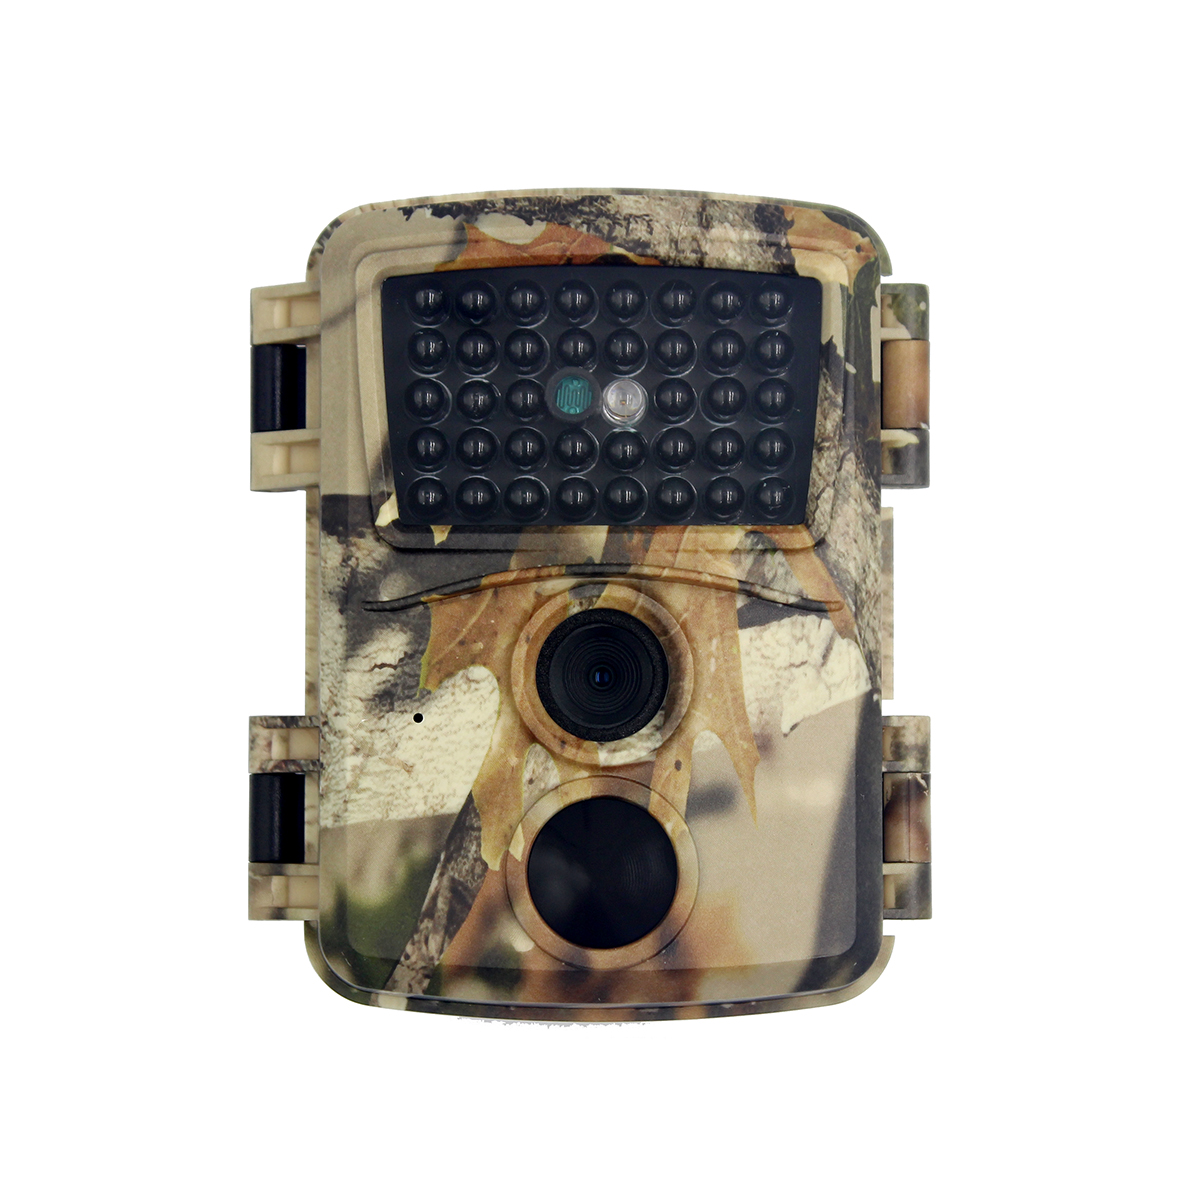 Find PR600C 12MP 1080P Night Vision Waterproof Hunting Camera 0 8s Trigger Time Recorder Wildlife Trail Camera for Home Security and Wildlife Monitoring for Sale on Gipsybee.com with cryptocurrencies